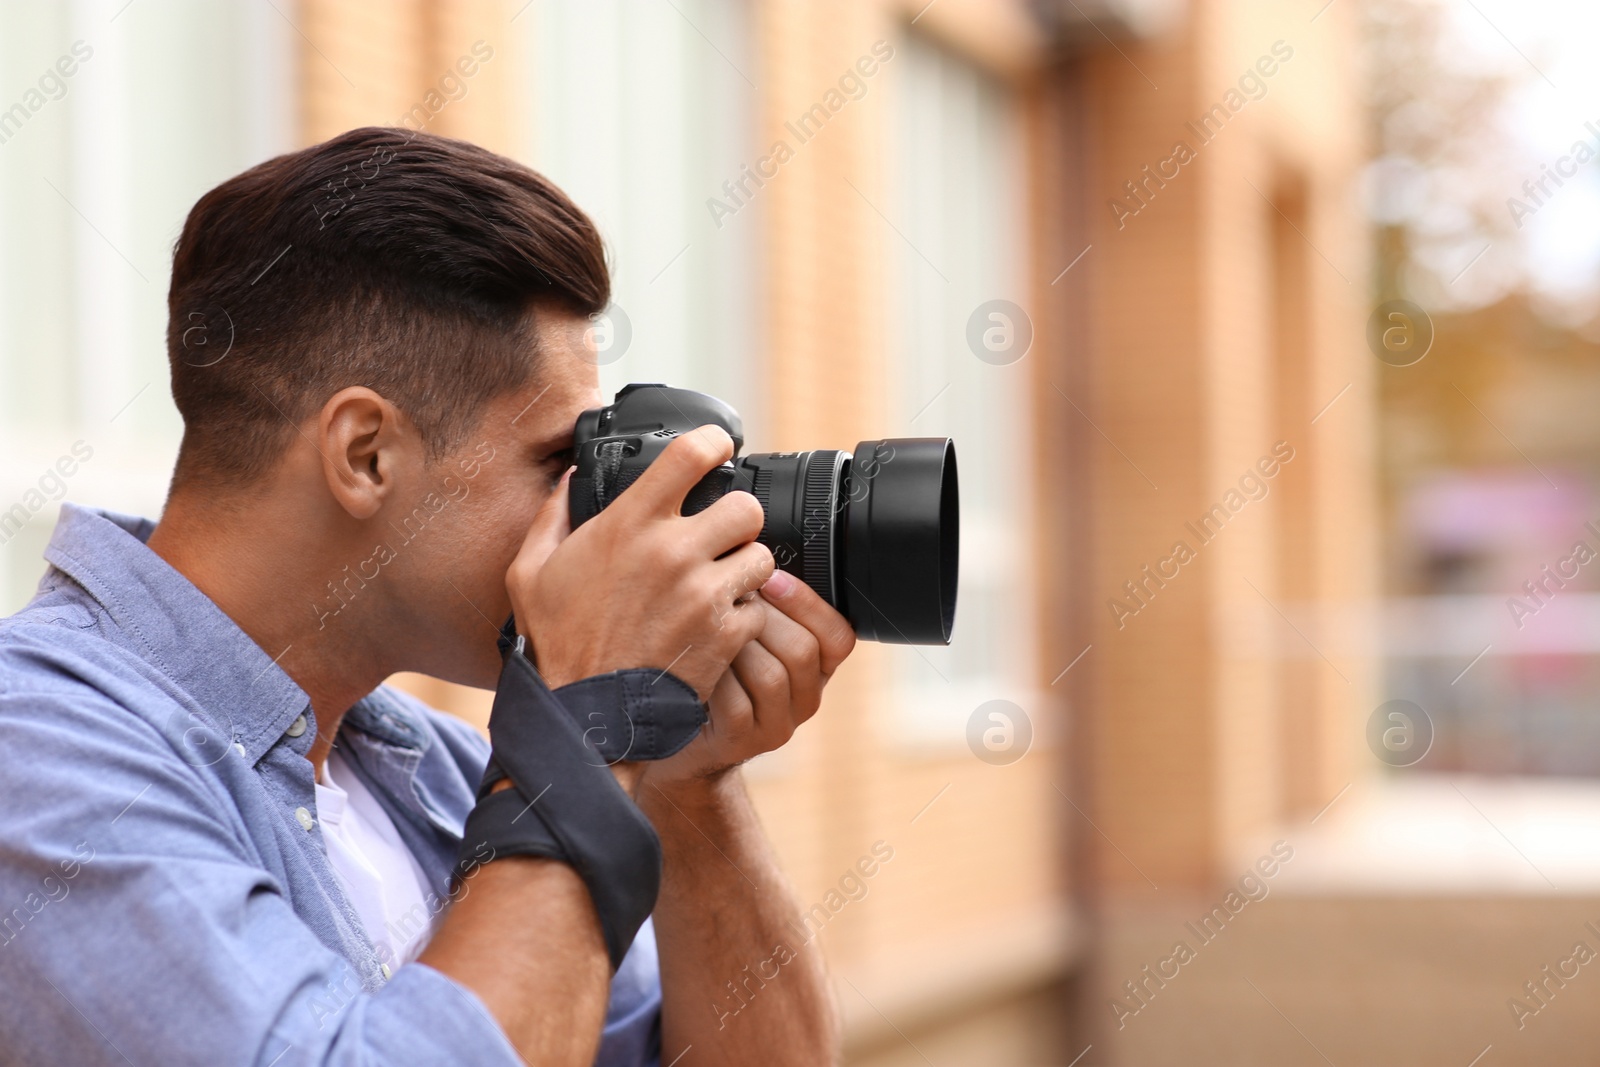 Photo of Photographer taking picture with professional camera outdoors